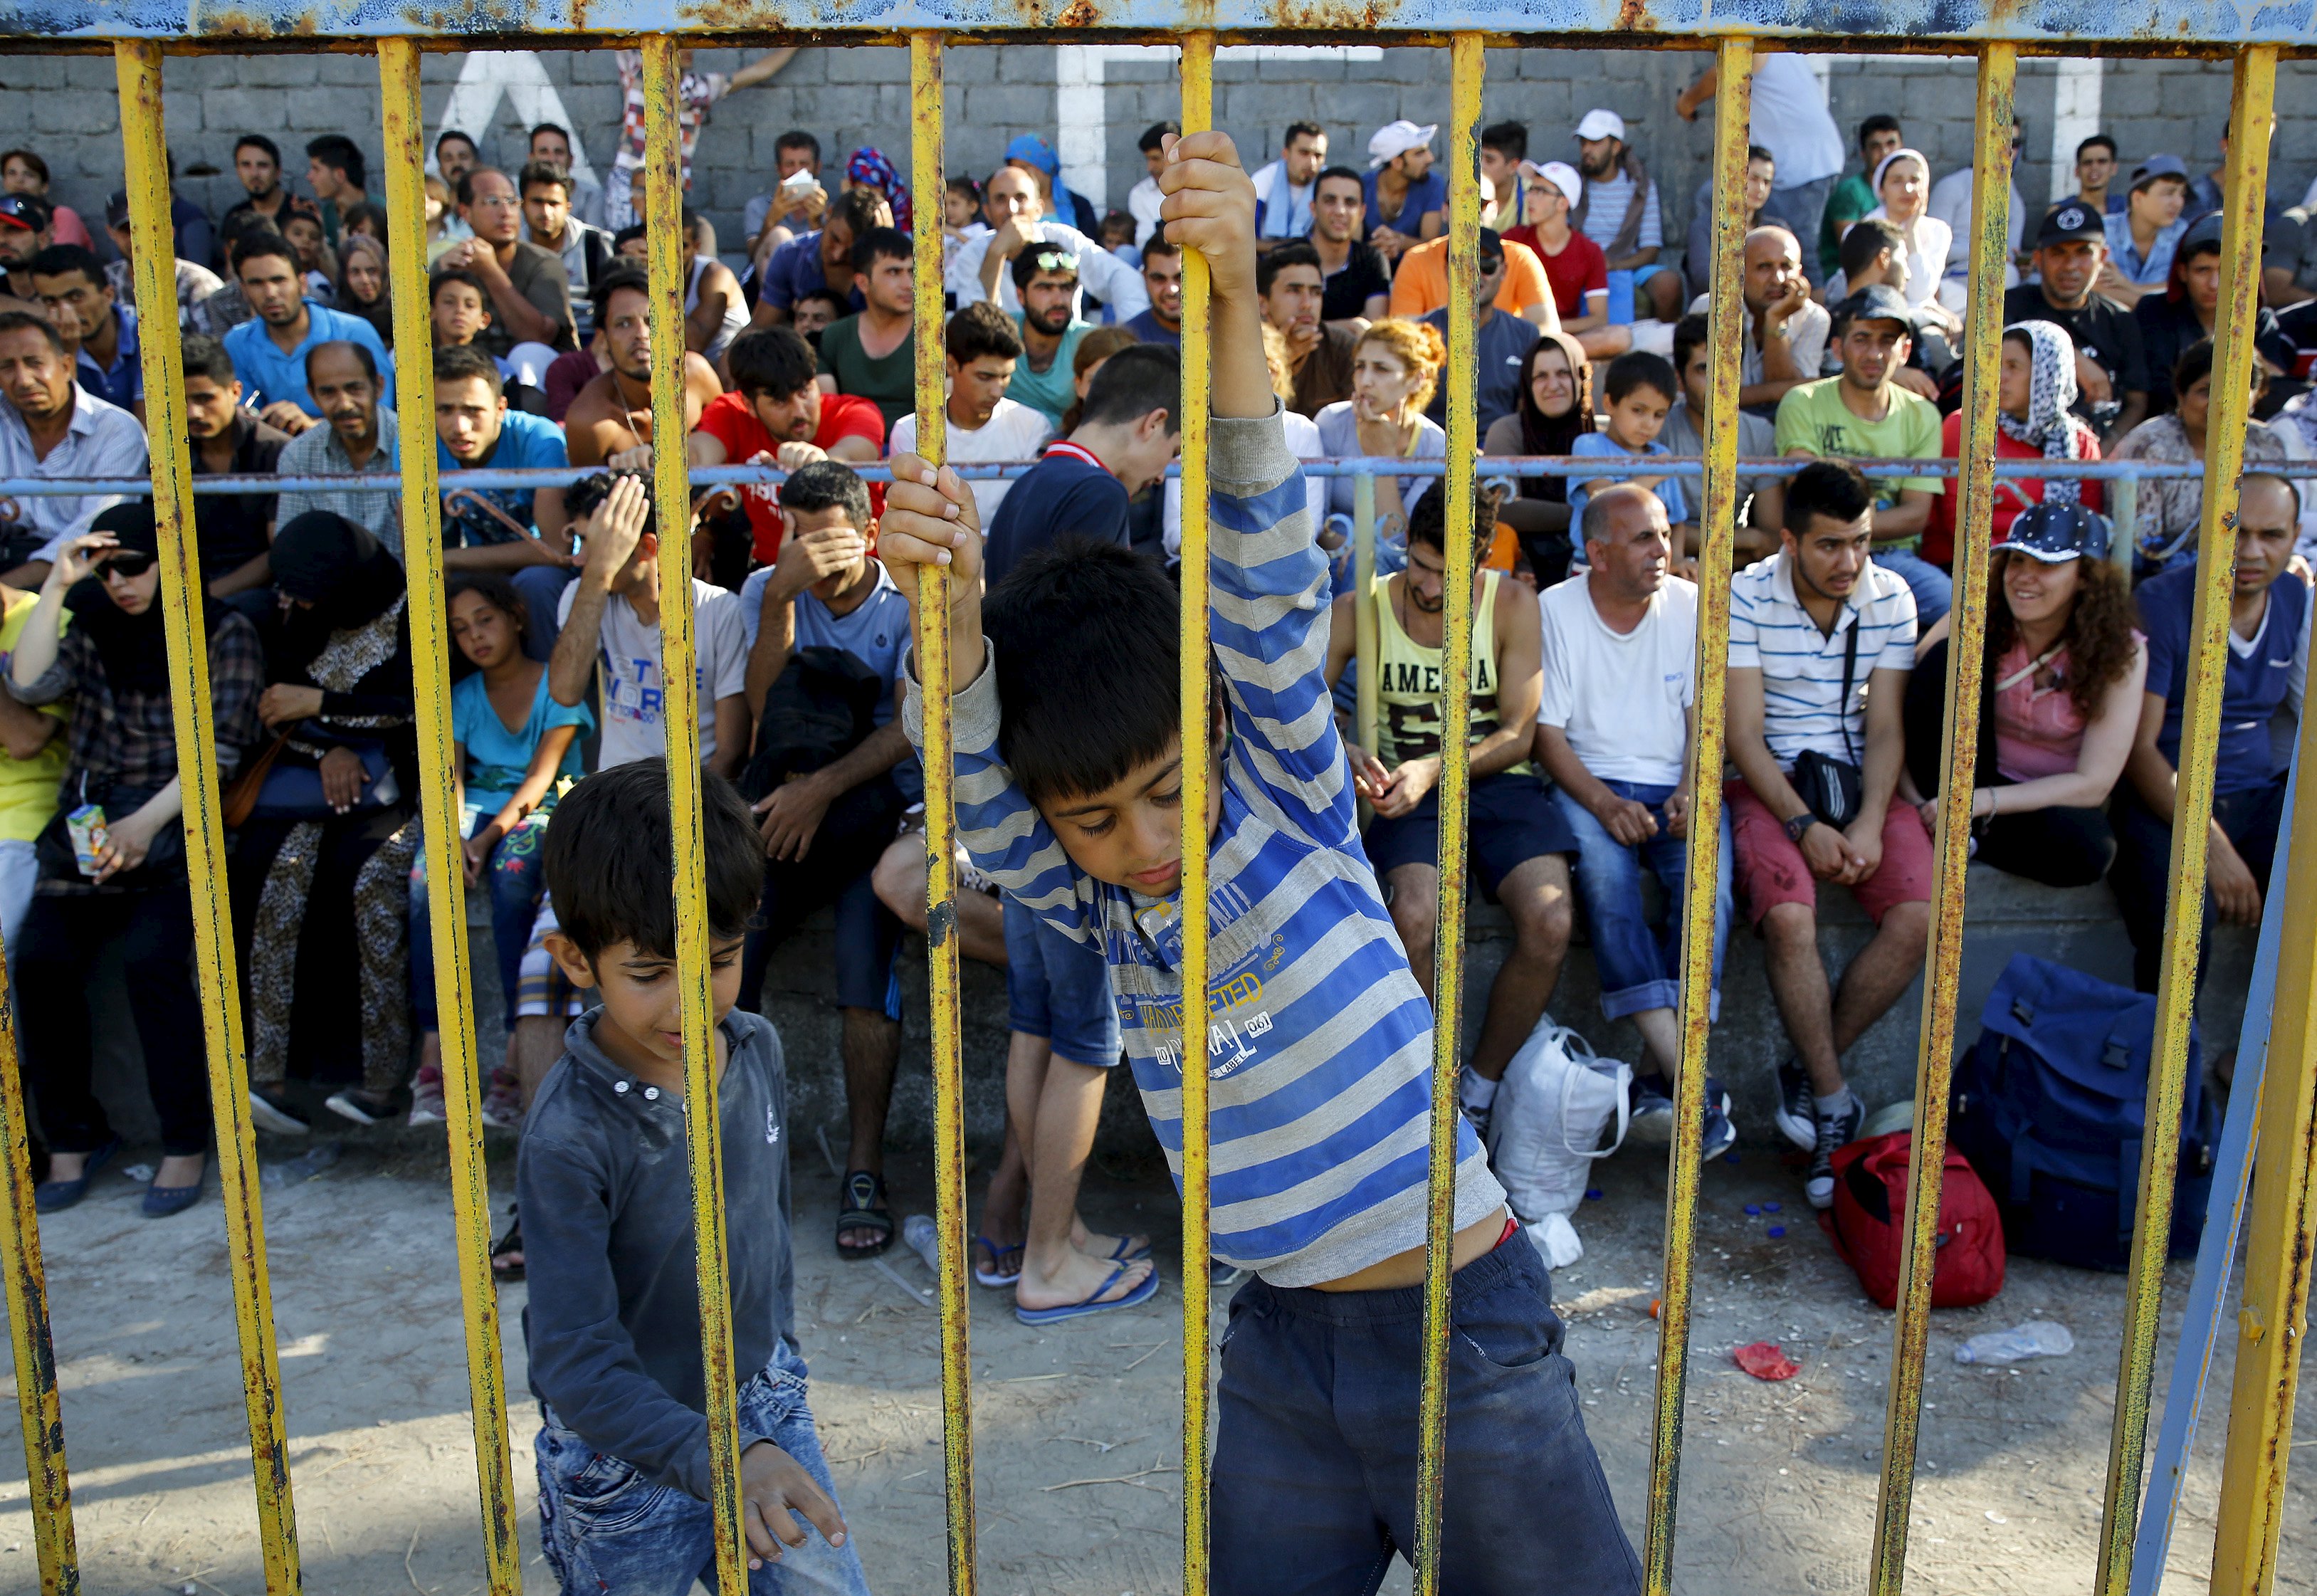 Syrian refugees pack the stands inside the national stadium on the Greek island of Kos August 11, 2015. Local authorities are struggling to cope with the increasing numbers of migrants and refugees arriving in dinghies from the nearby Turkish coast. Police ushered most migrants into the stadium, packing the stands, in order to speed up the registration process. Some migrants set up tents while police stood guard in riot gear. REUTERS/ Yannis Behrakis